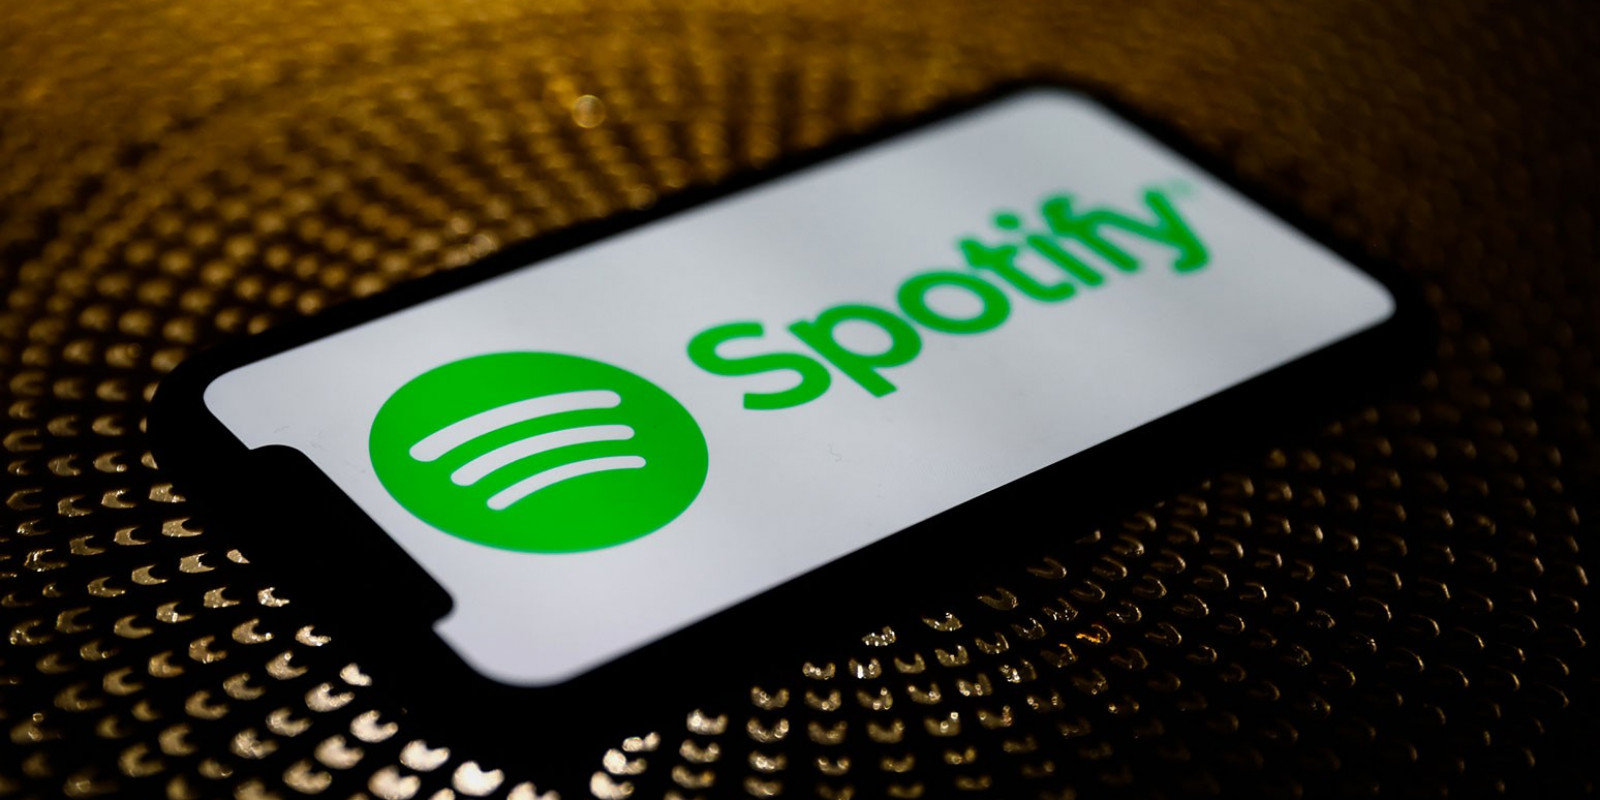 Spotify Expands International Footprint, Bringing Audio to 80+ New Markets